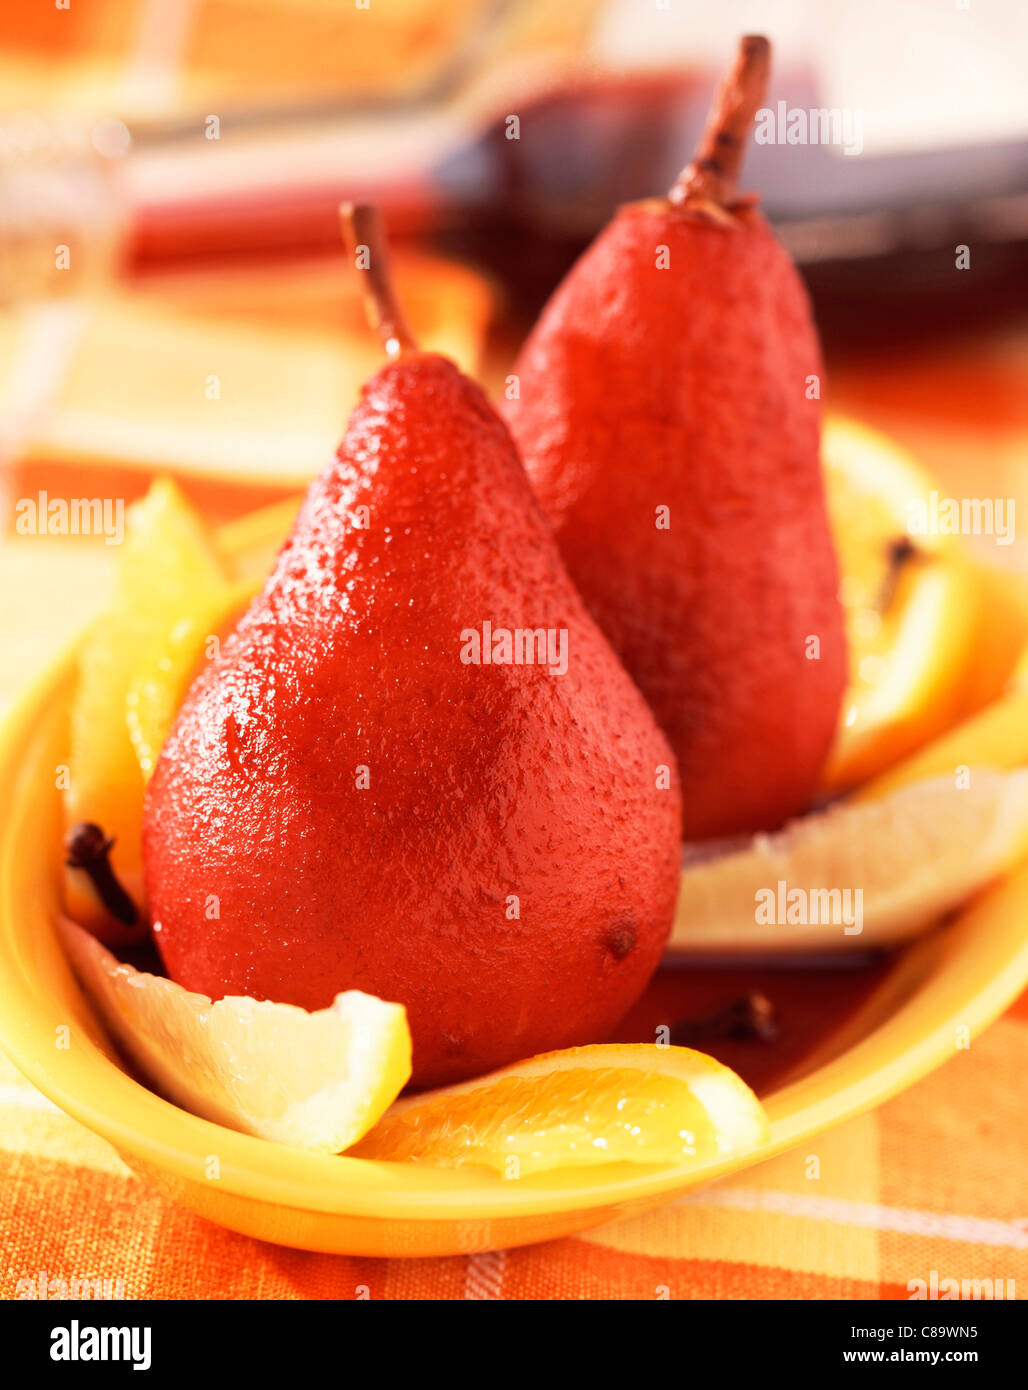 Pears and citrus fruit in spiced red wine Stock Photo